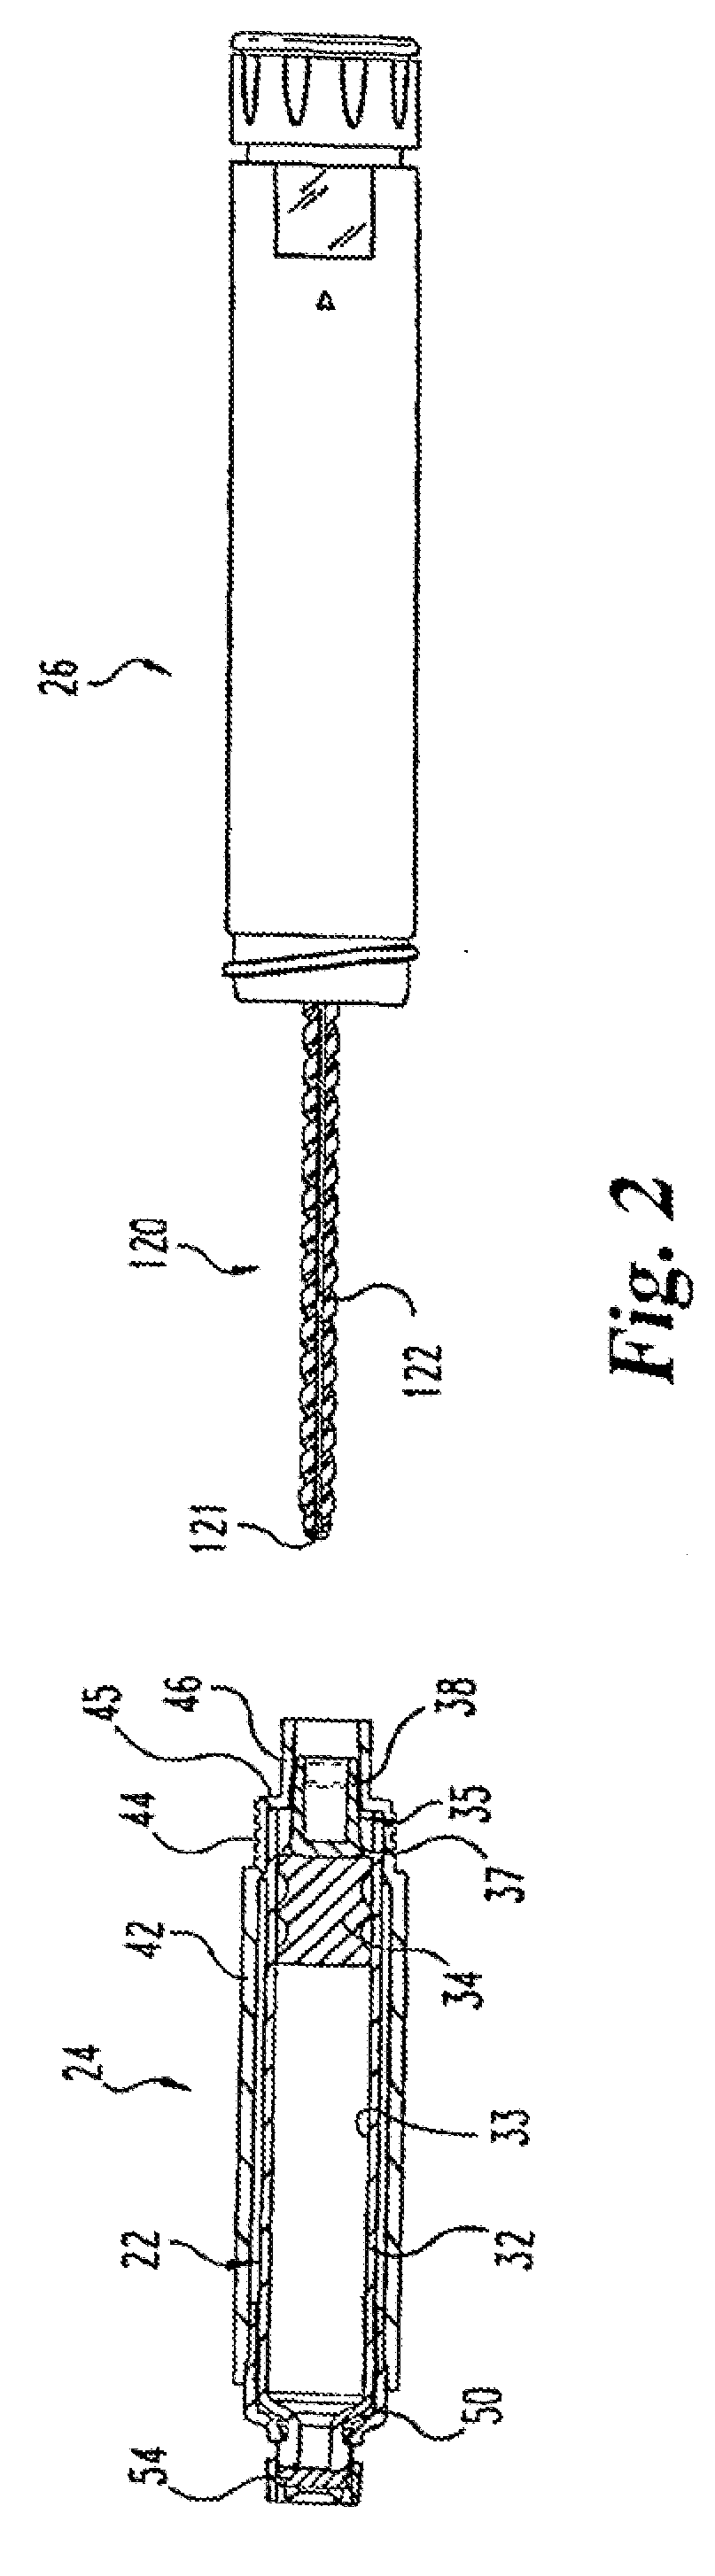 Medication injector apparatus with drive assembly that facilitates reset